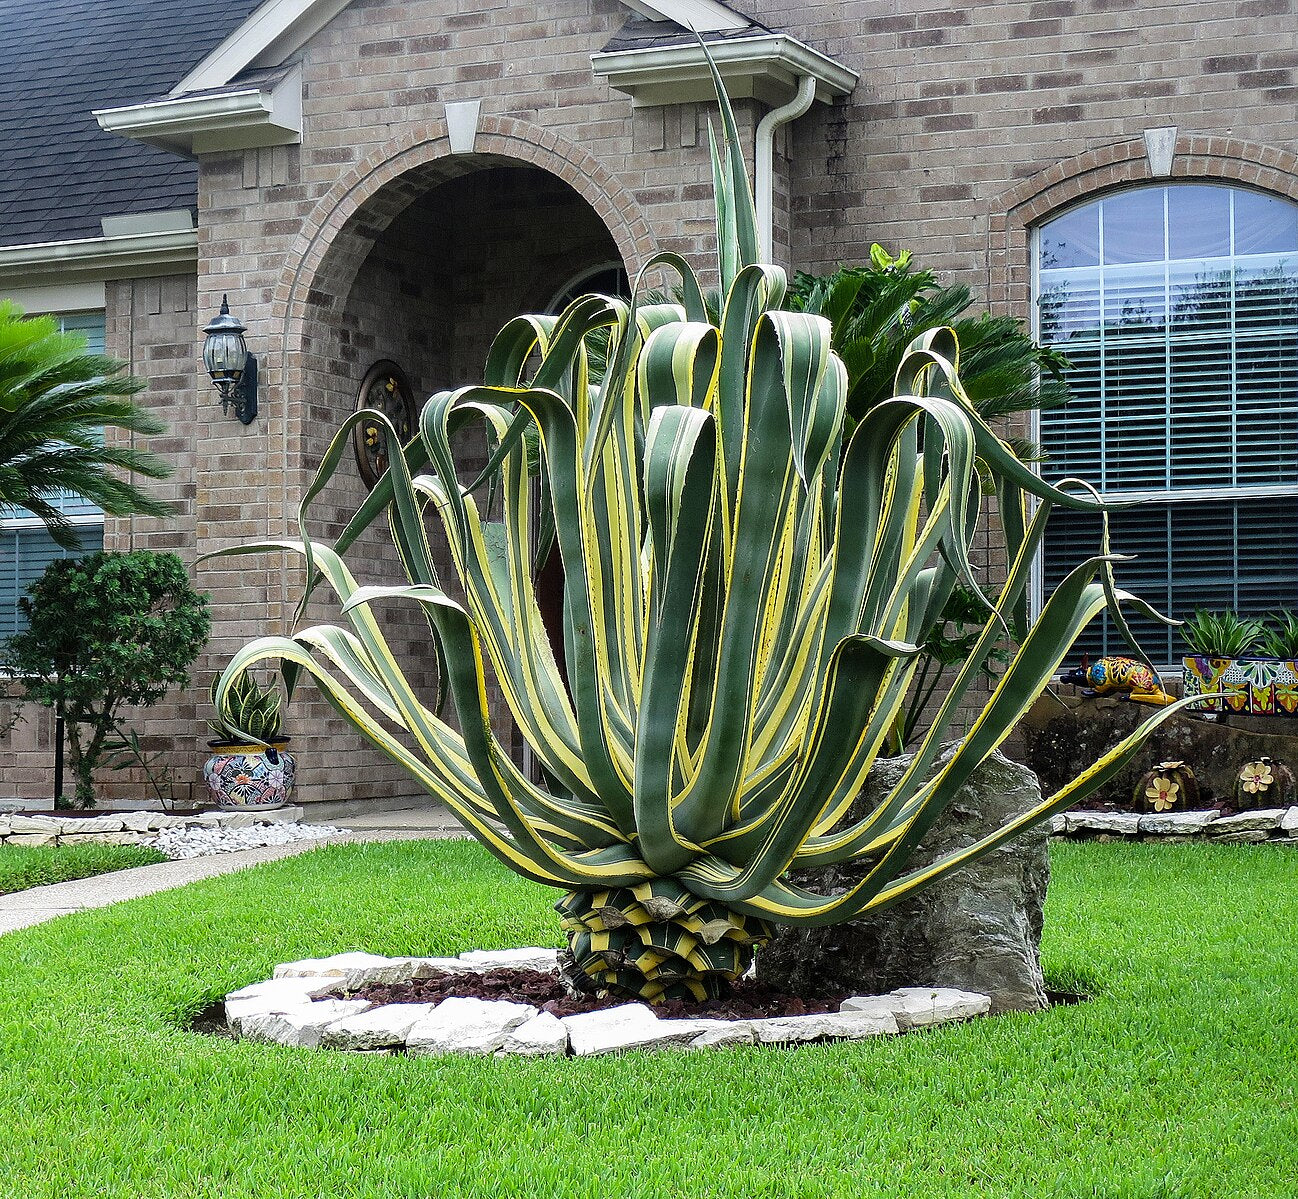 Variegated Agave Century Plant